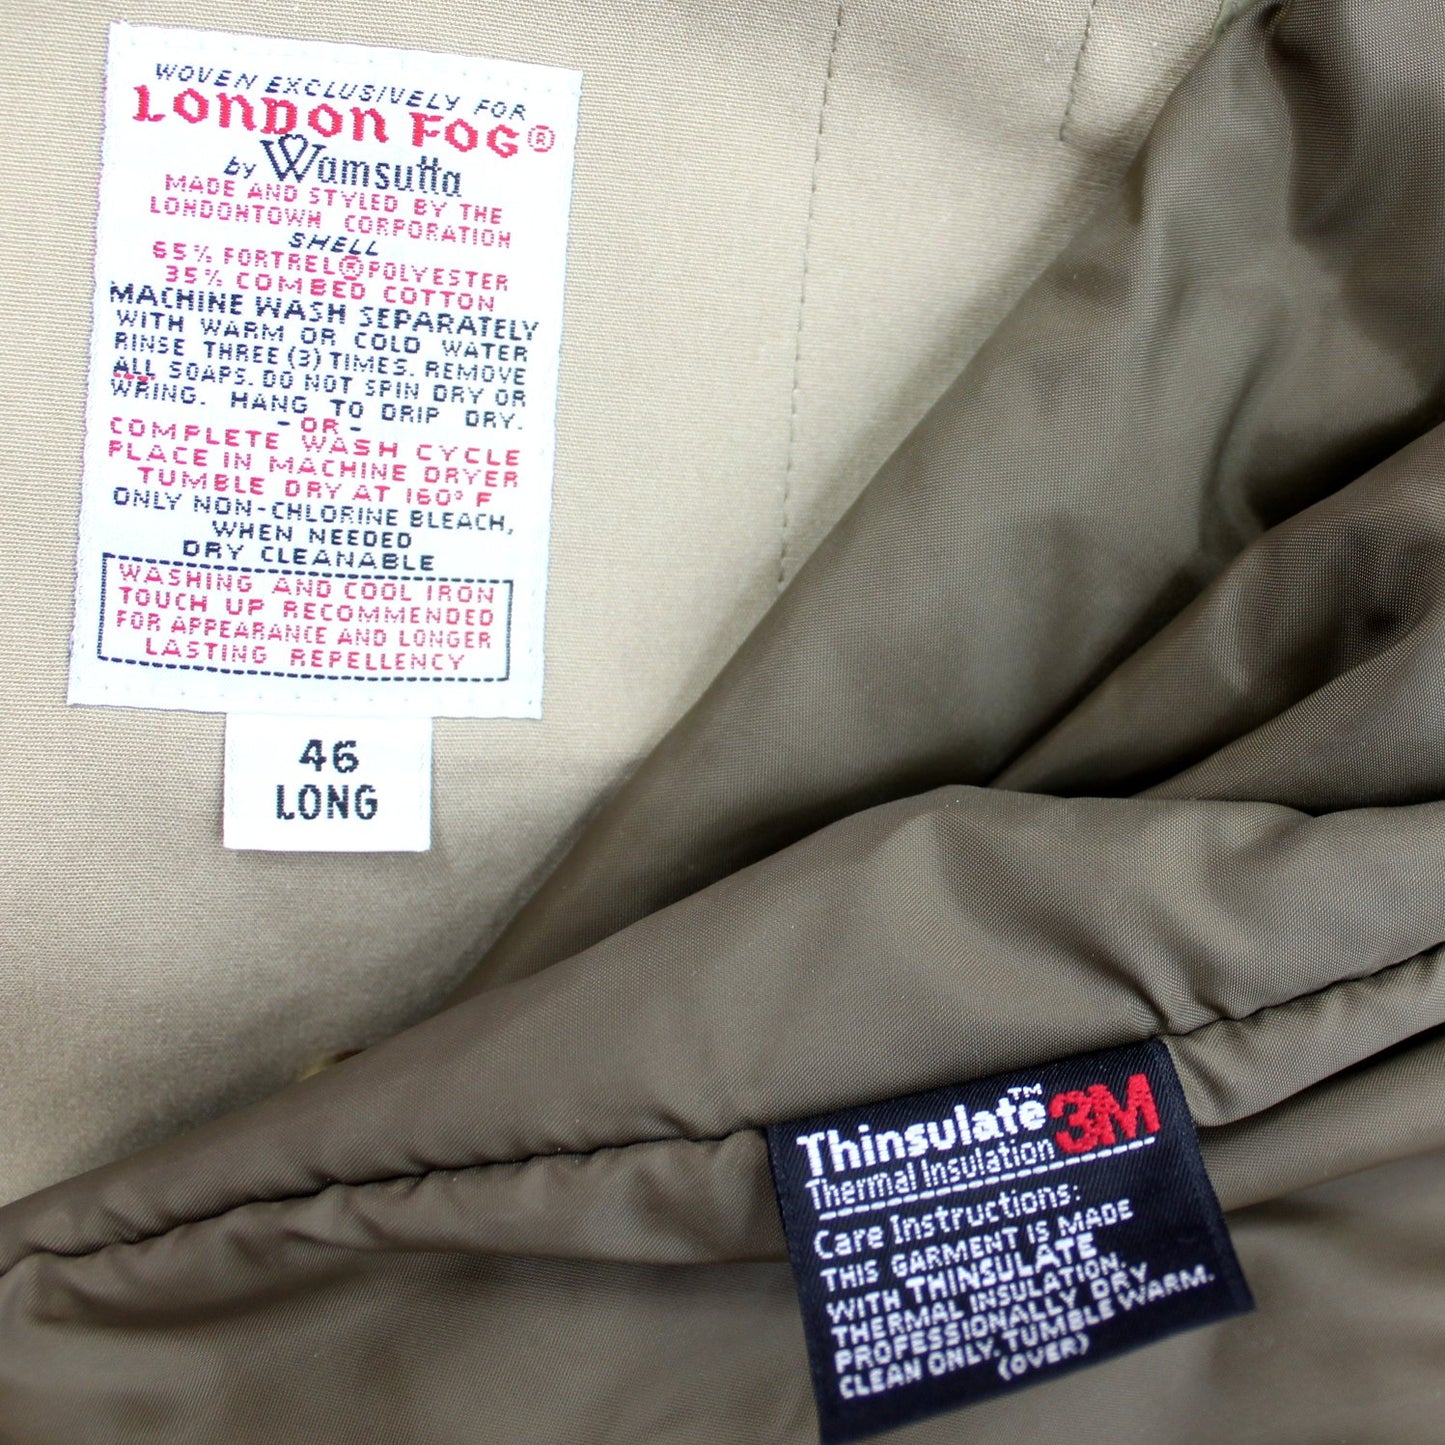 London Fog Trench Coat Men's 46L Dbl Breast Removable Thinsulate Lining tags fiber and care